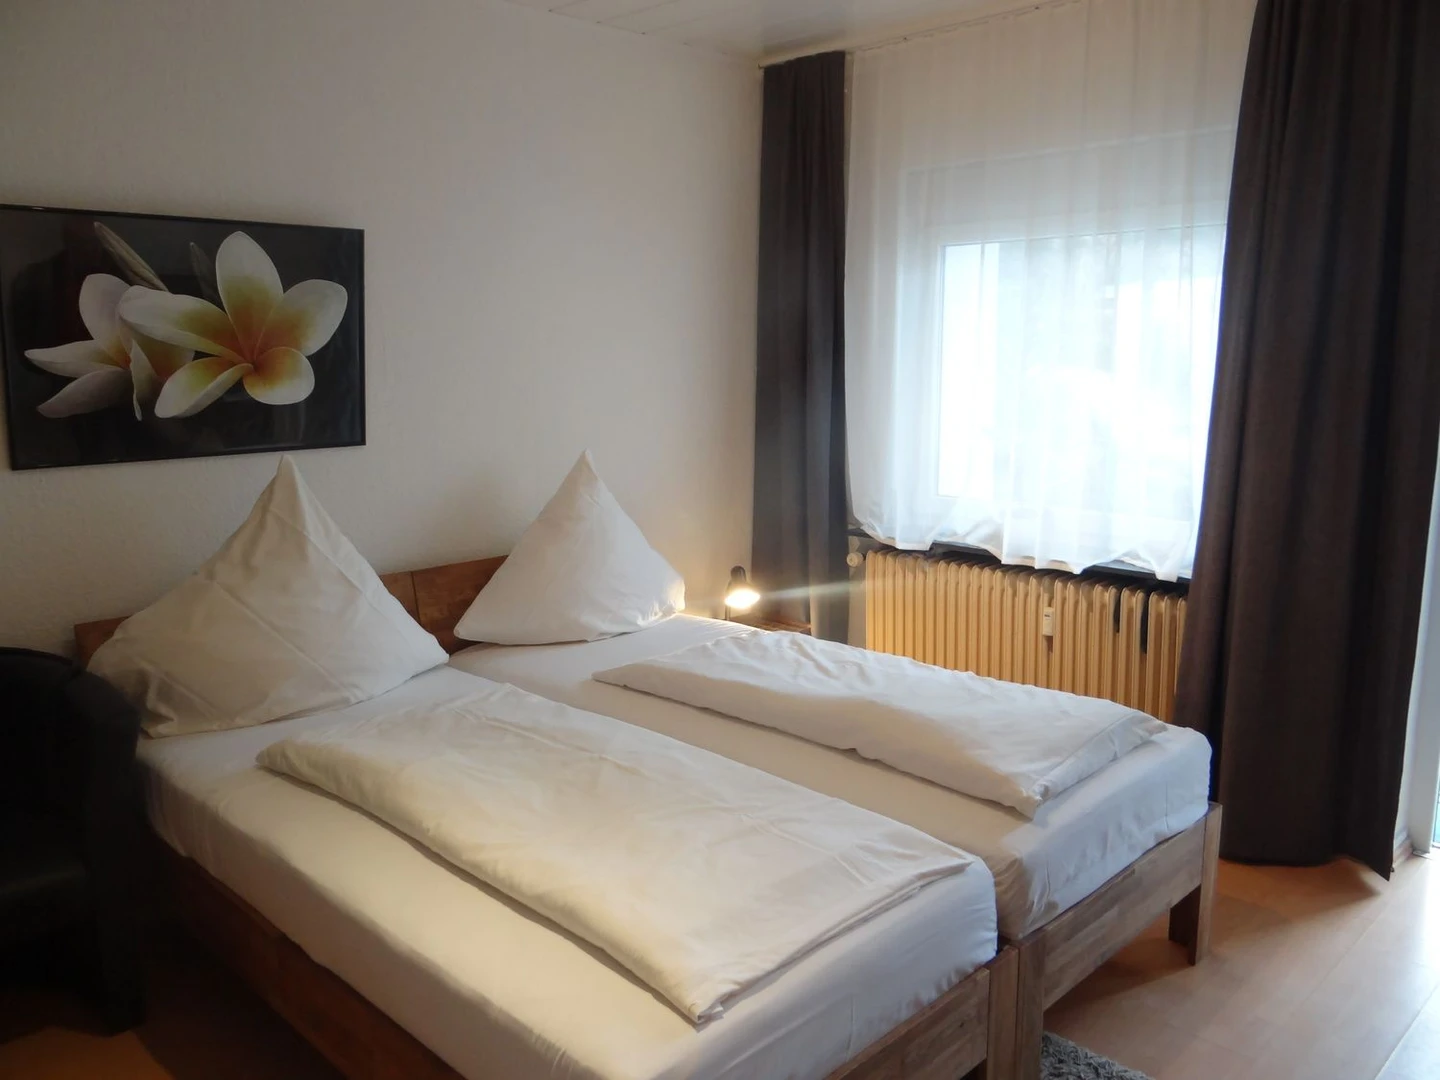 Renting rooms by the month in Darmstadt